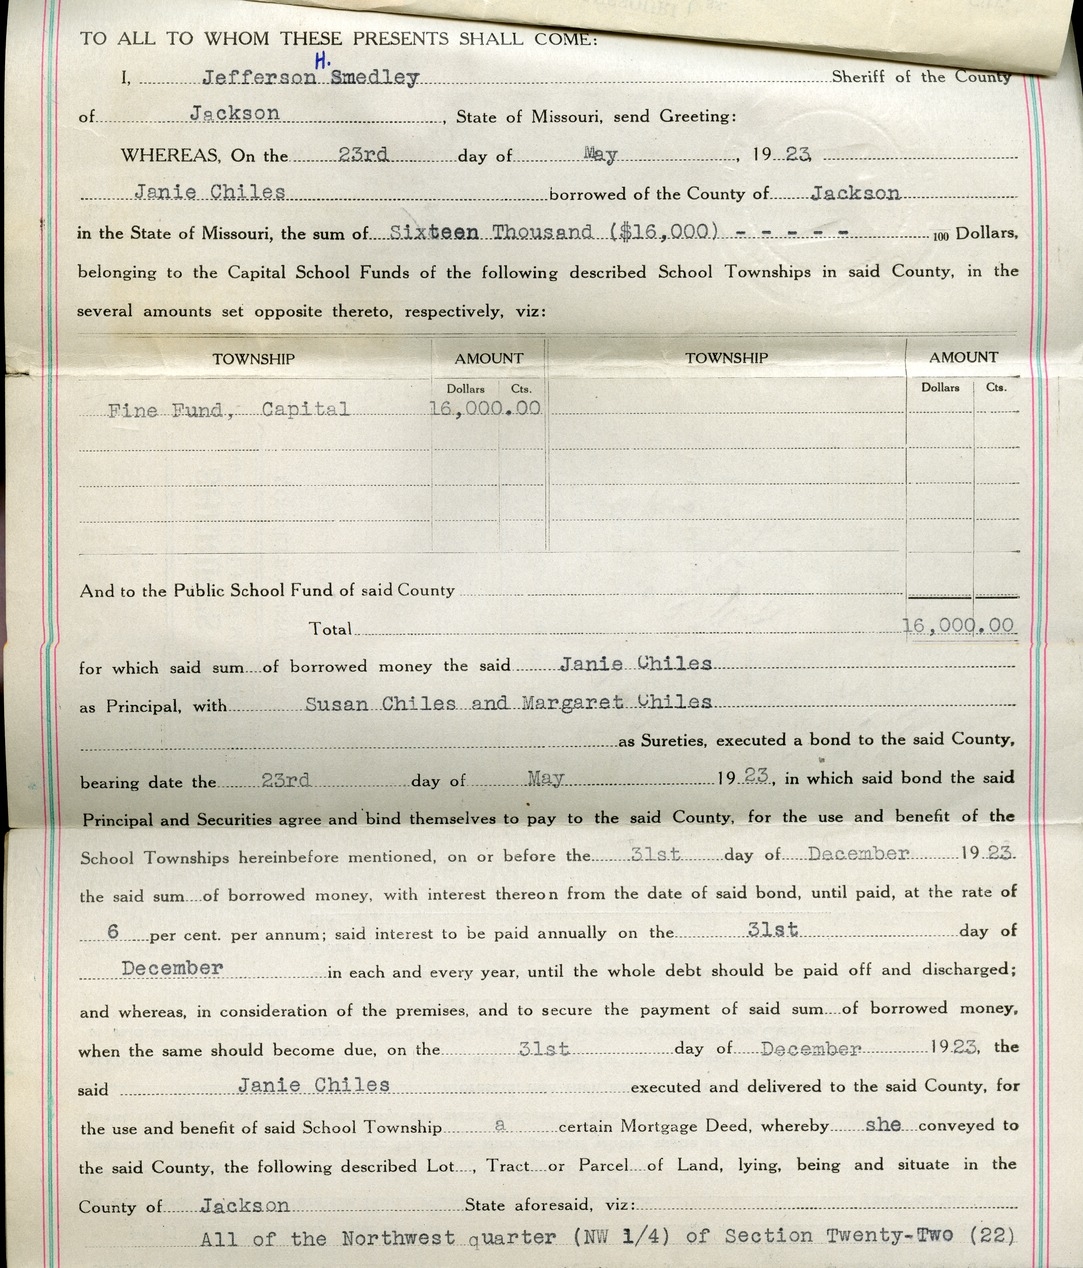 Sheriff's Deed from Janie Chiles to Margaret Chiles